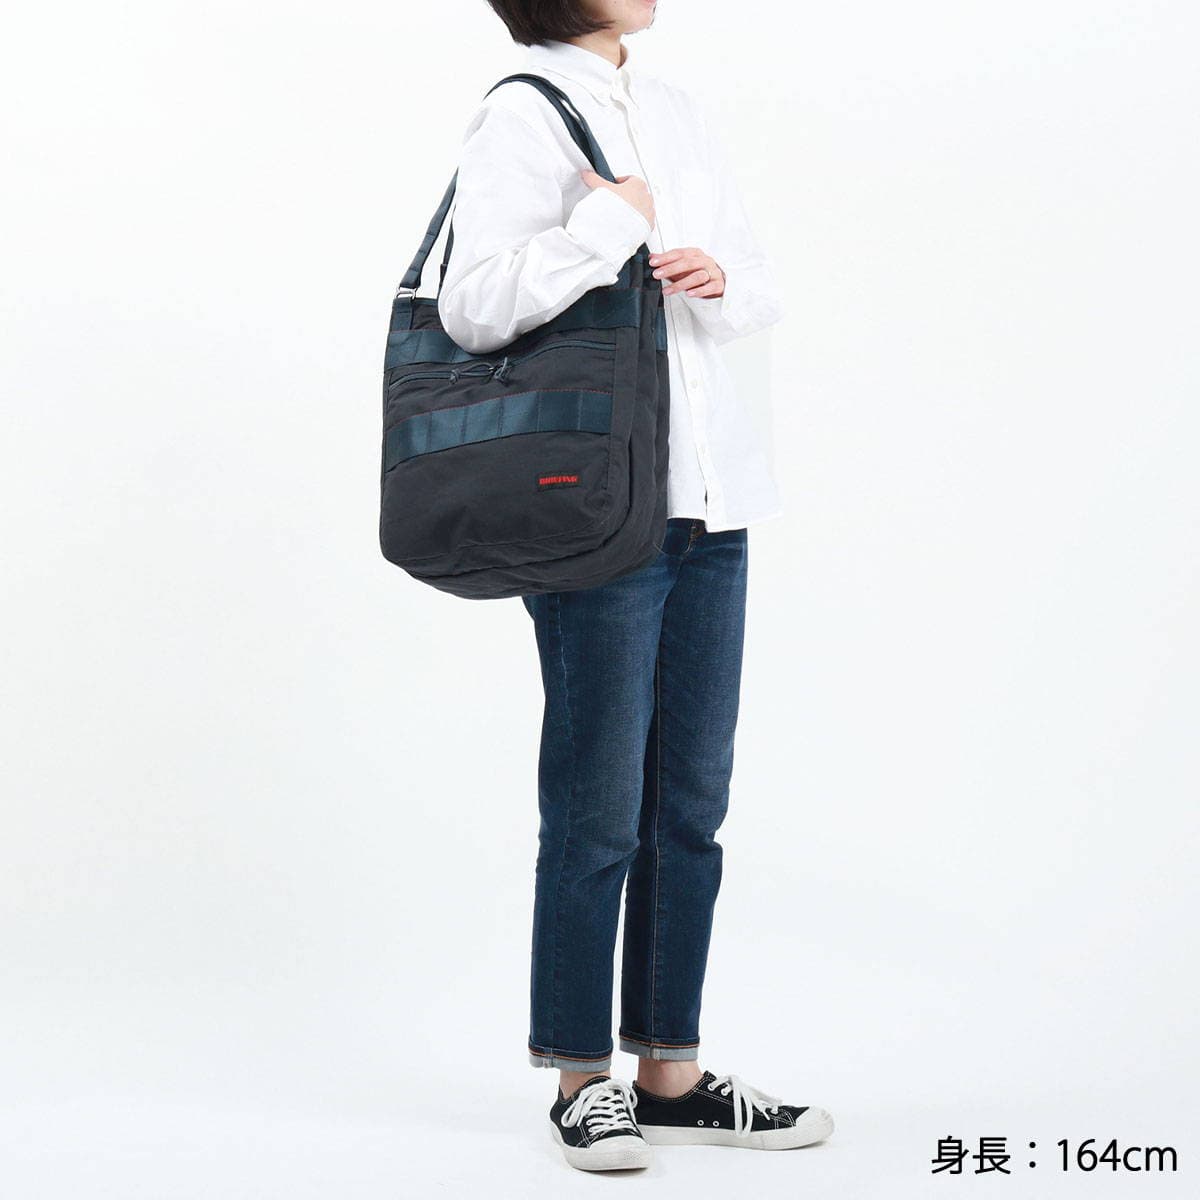 BRIEFING ブリーフィング　R3 TOTE MW  NAVY